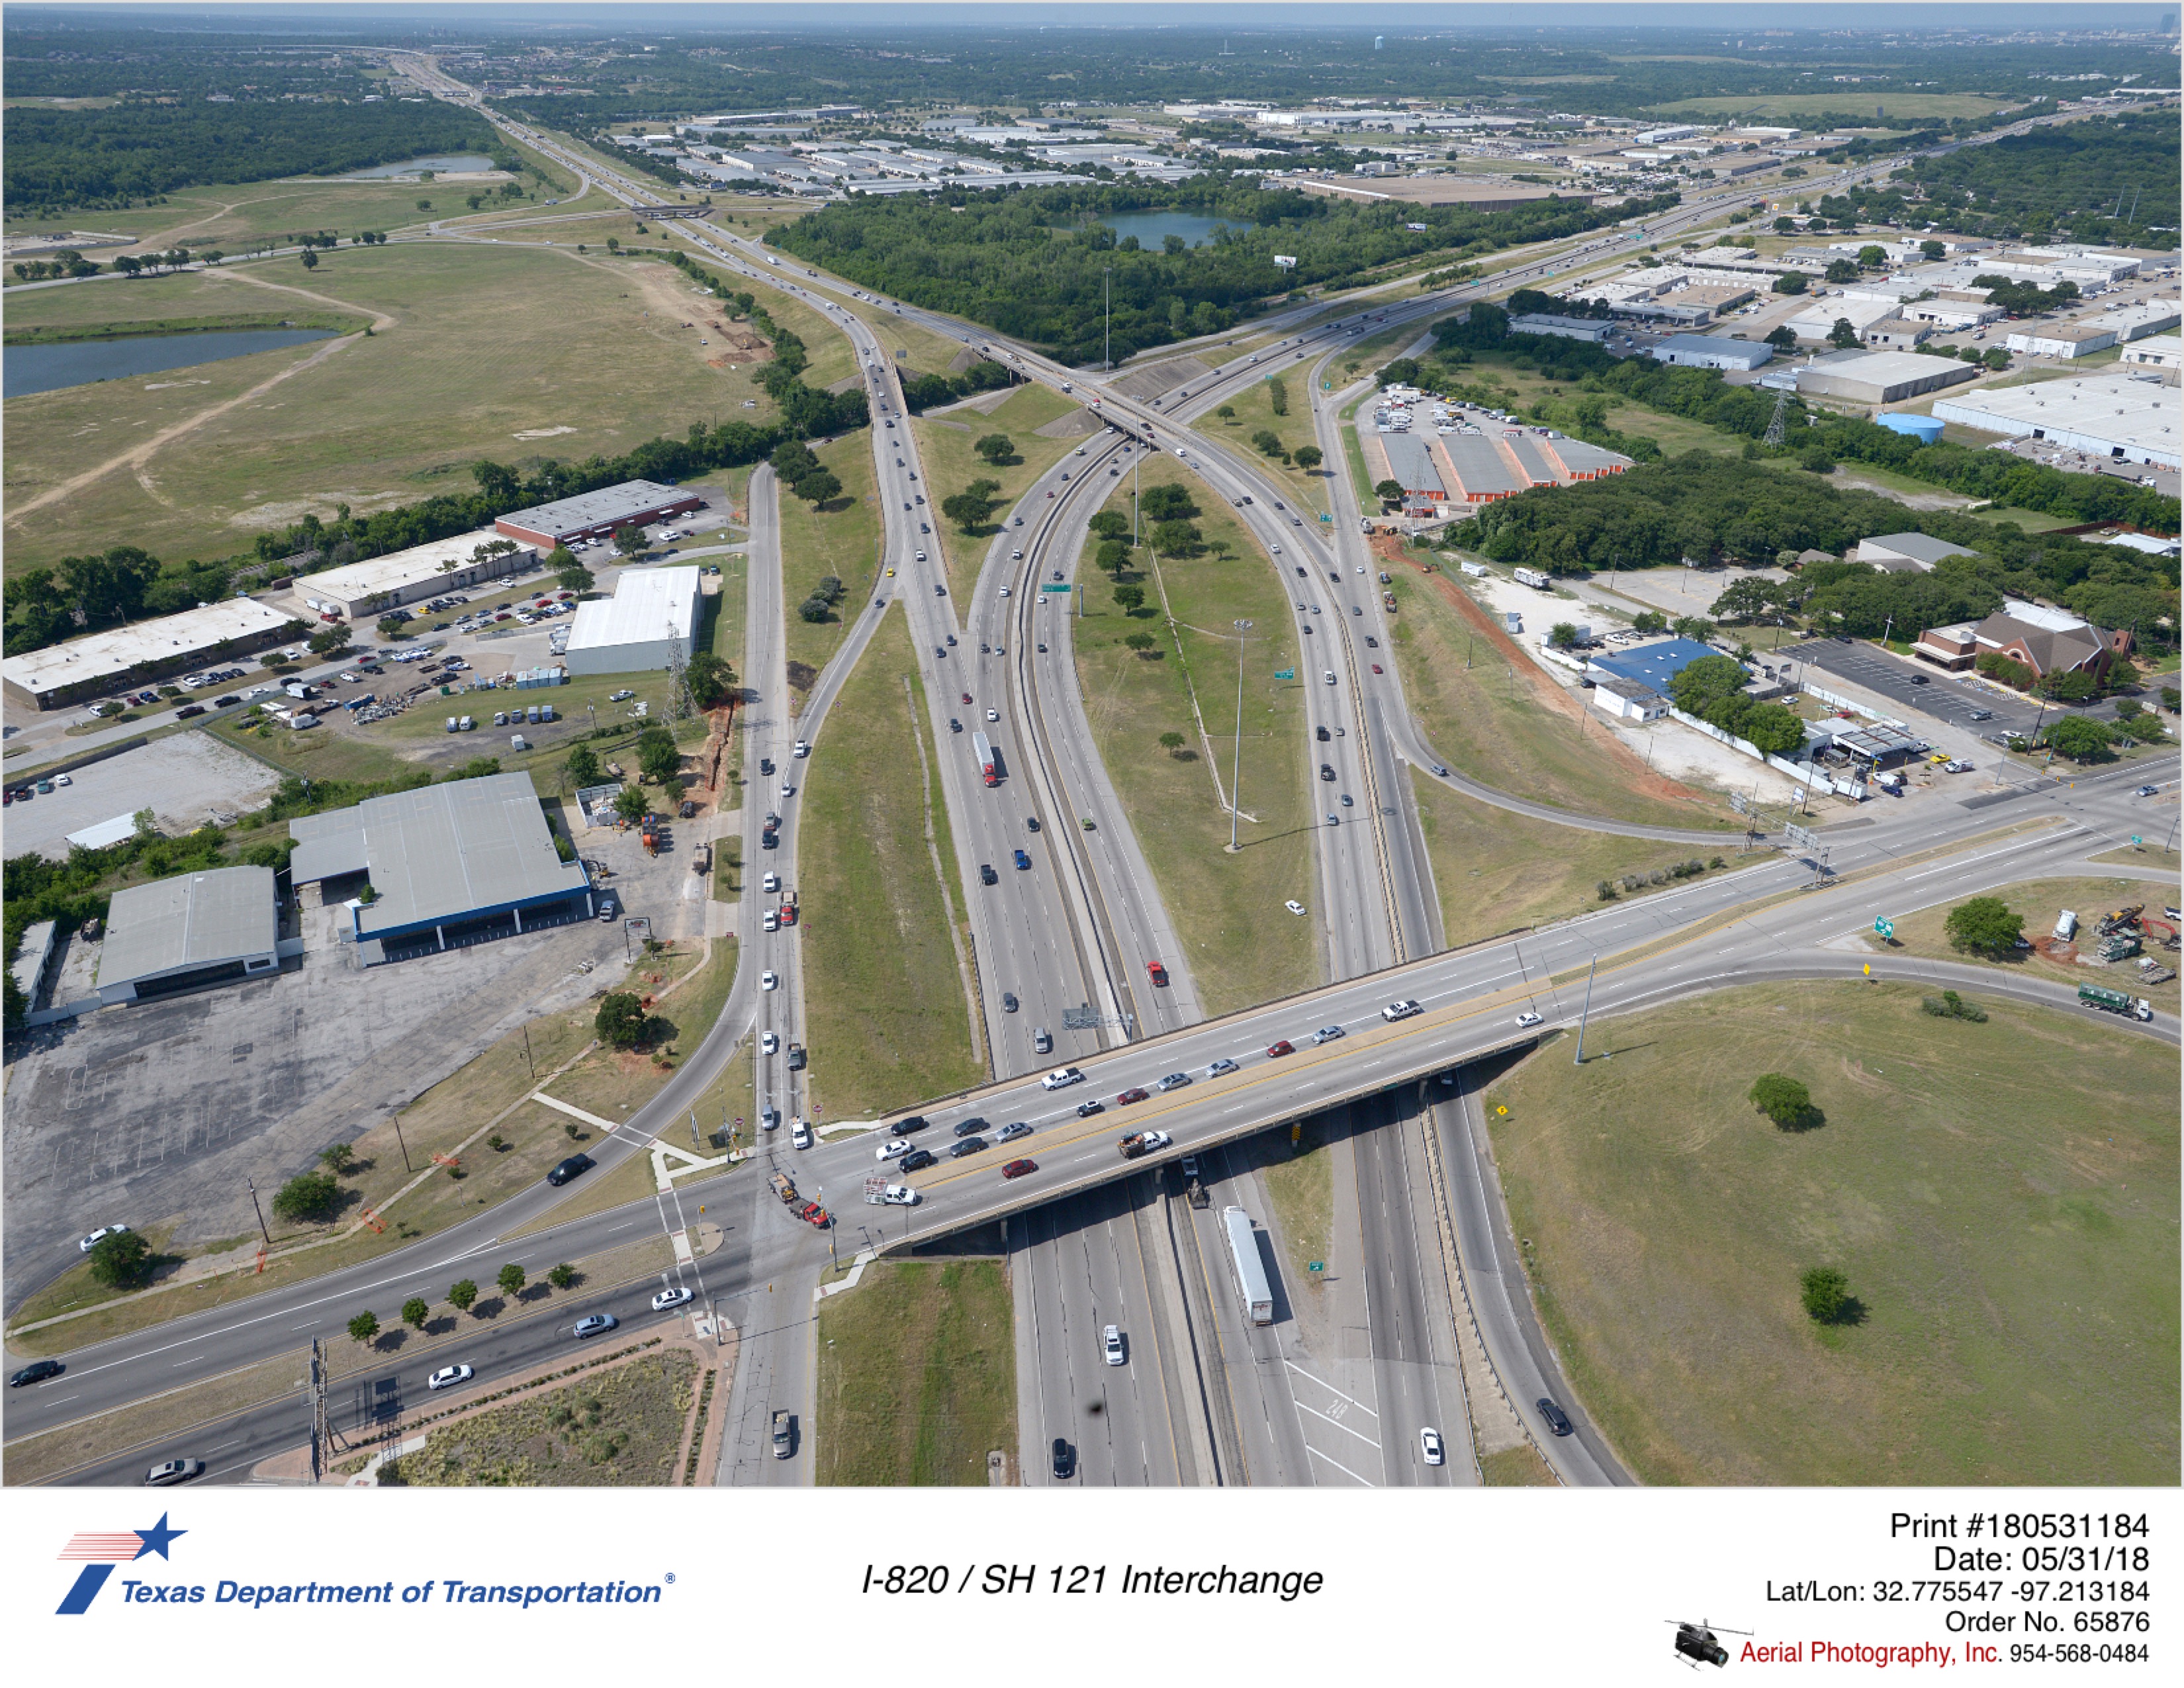 Aerial view taken May 2018 of I-820/SH 121 interchange. Foreground is of SH 10/Hurst Boulevard interchange. Split of SH 121 and I-820 is visible in background.